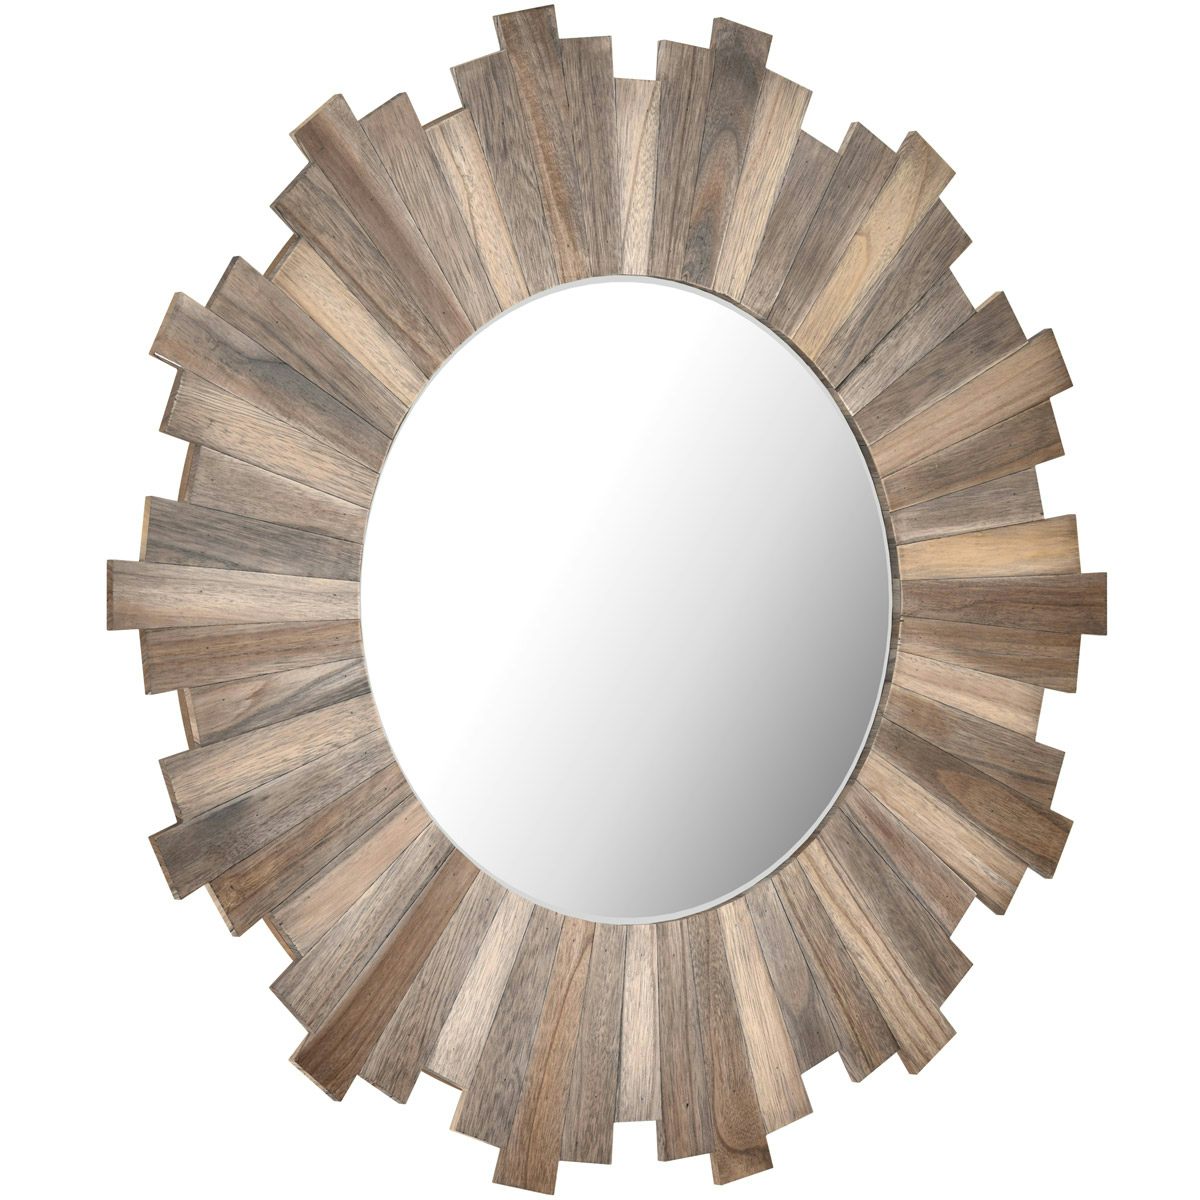 Accents Stockholm natural wood mirror